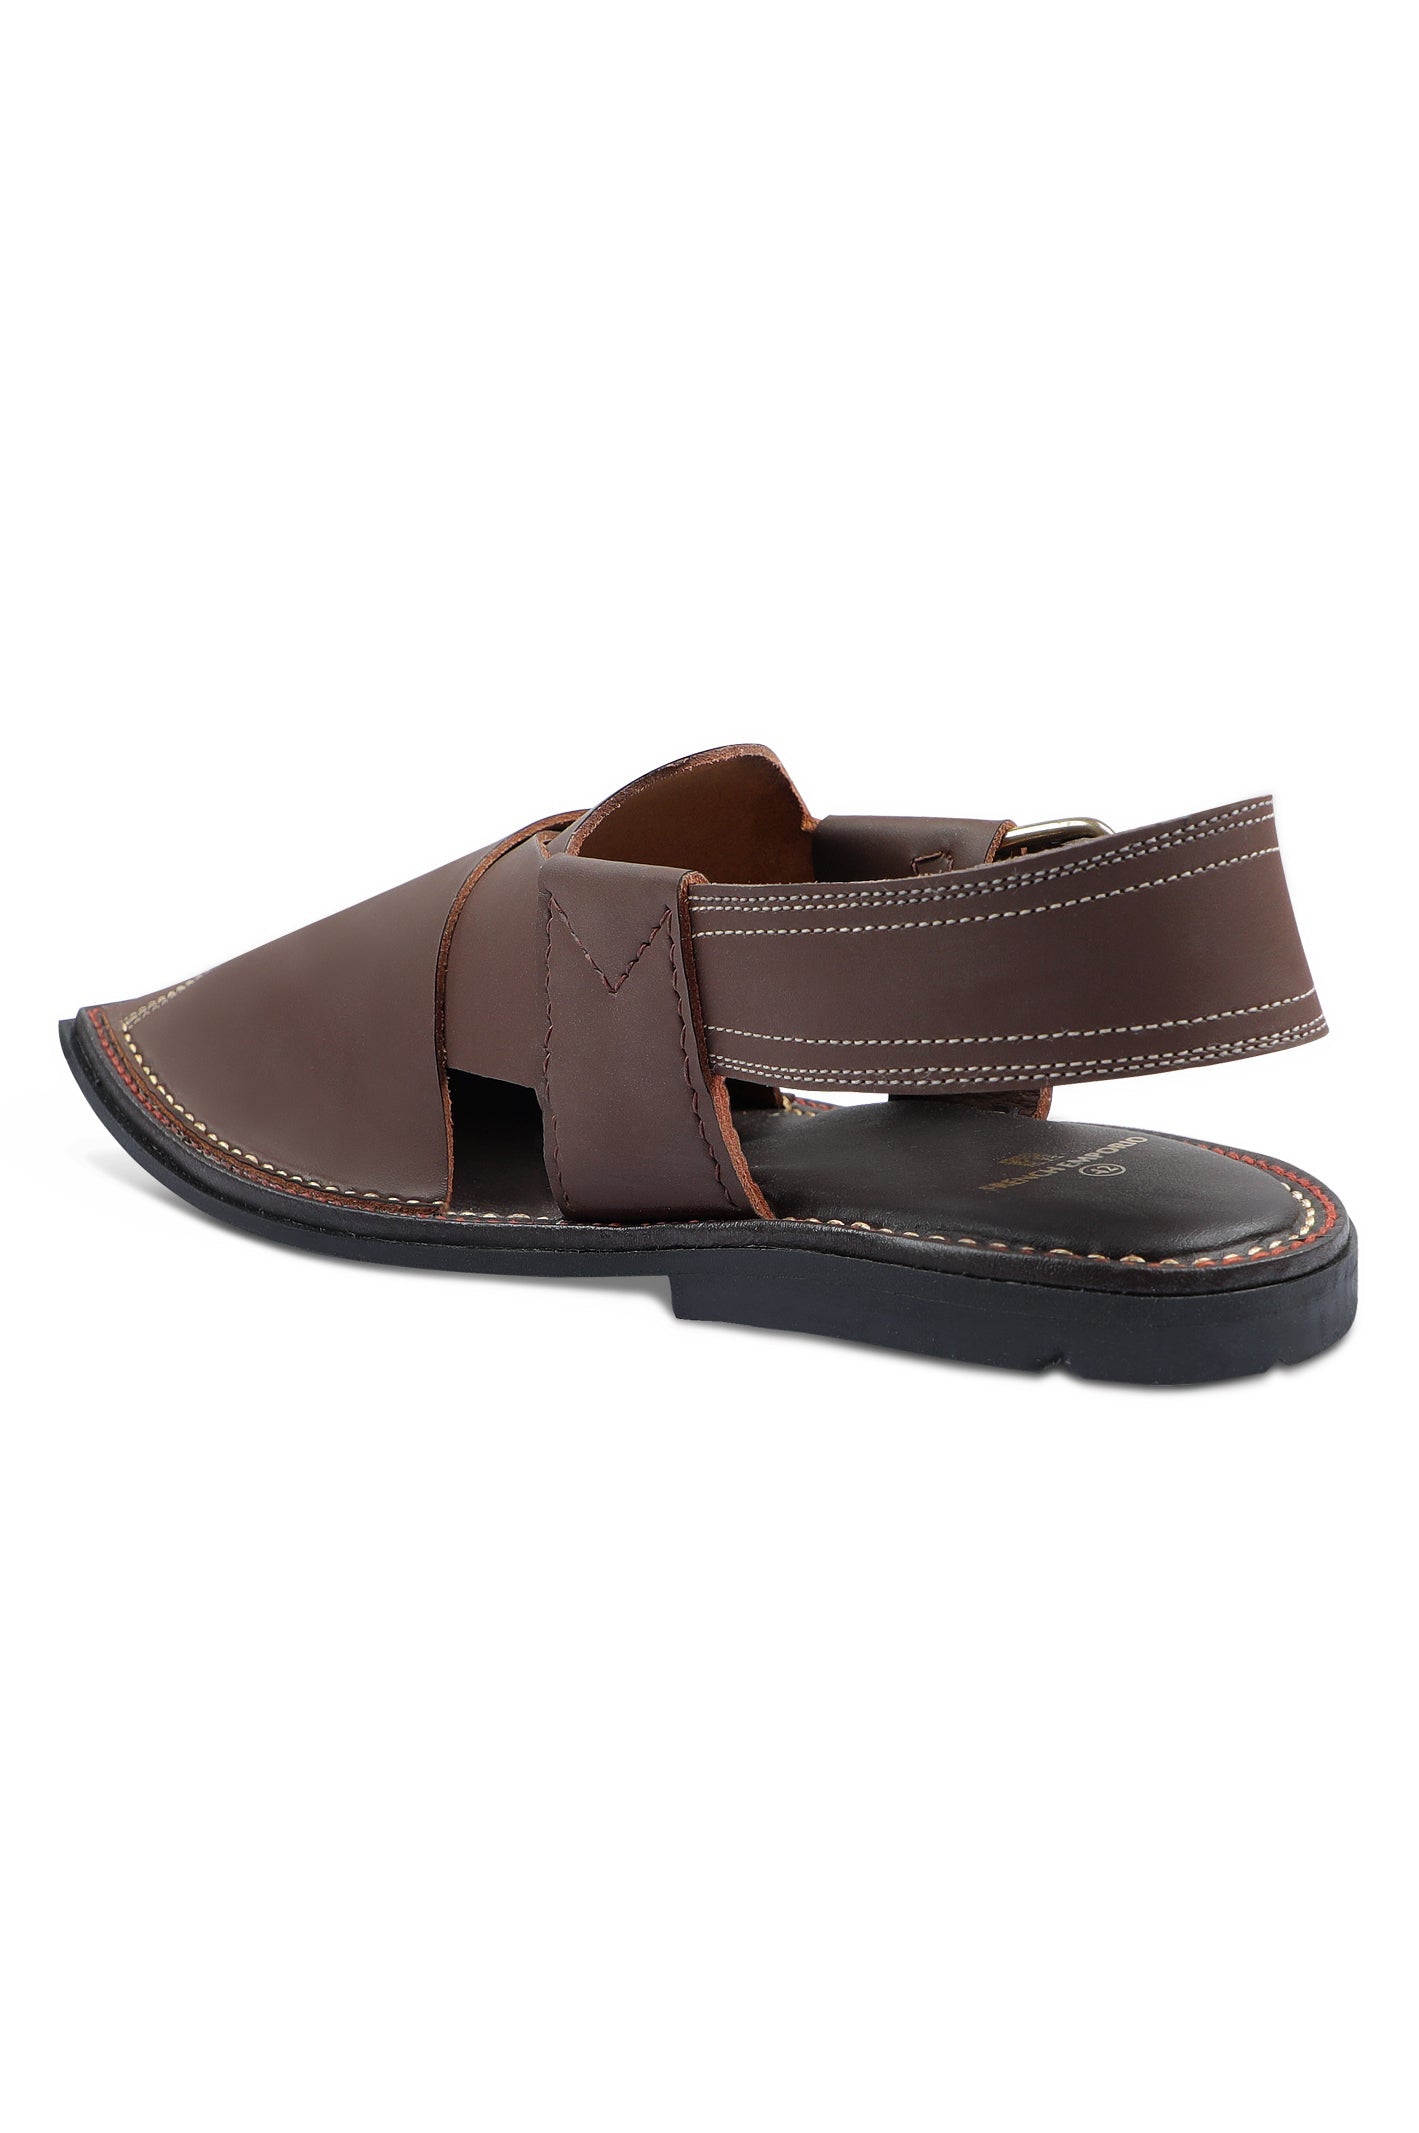 French Emporio Men Sandals SKU: PSLD-0029-COFFEE - Diners